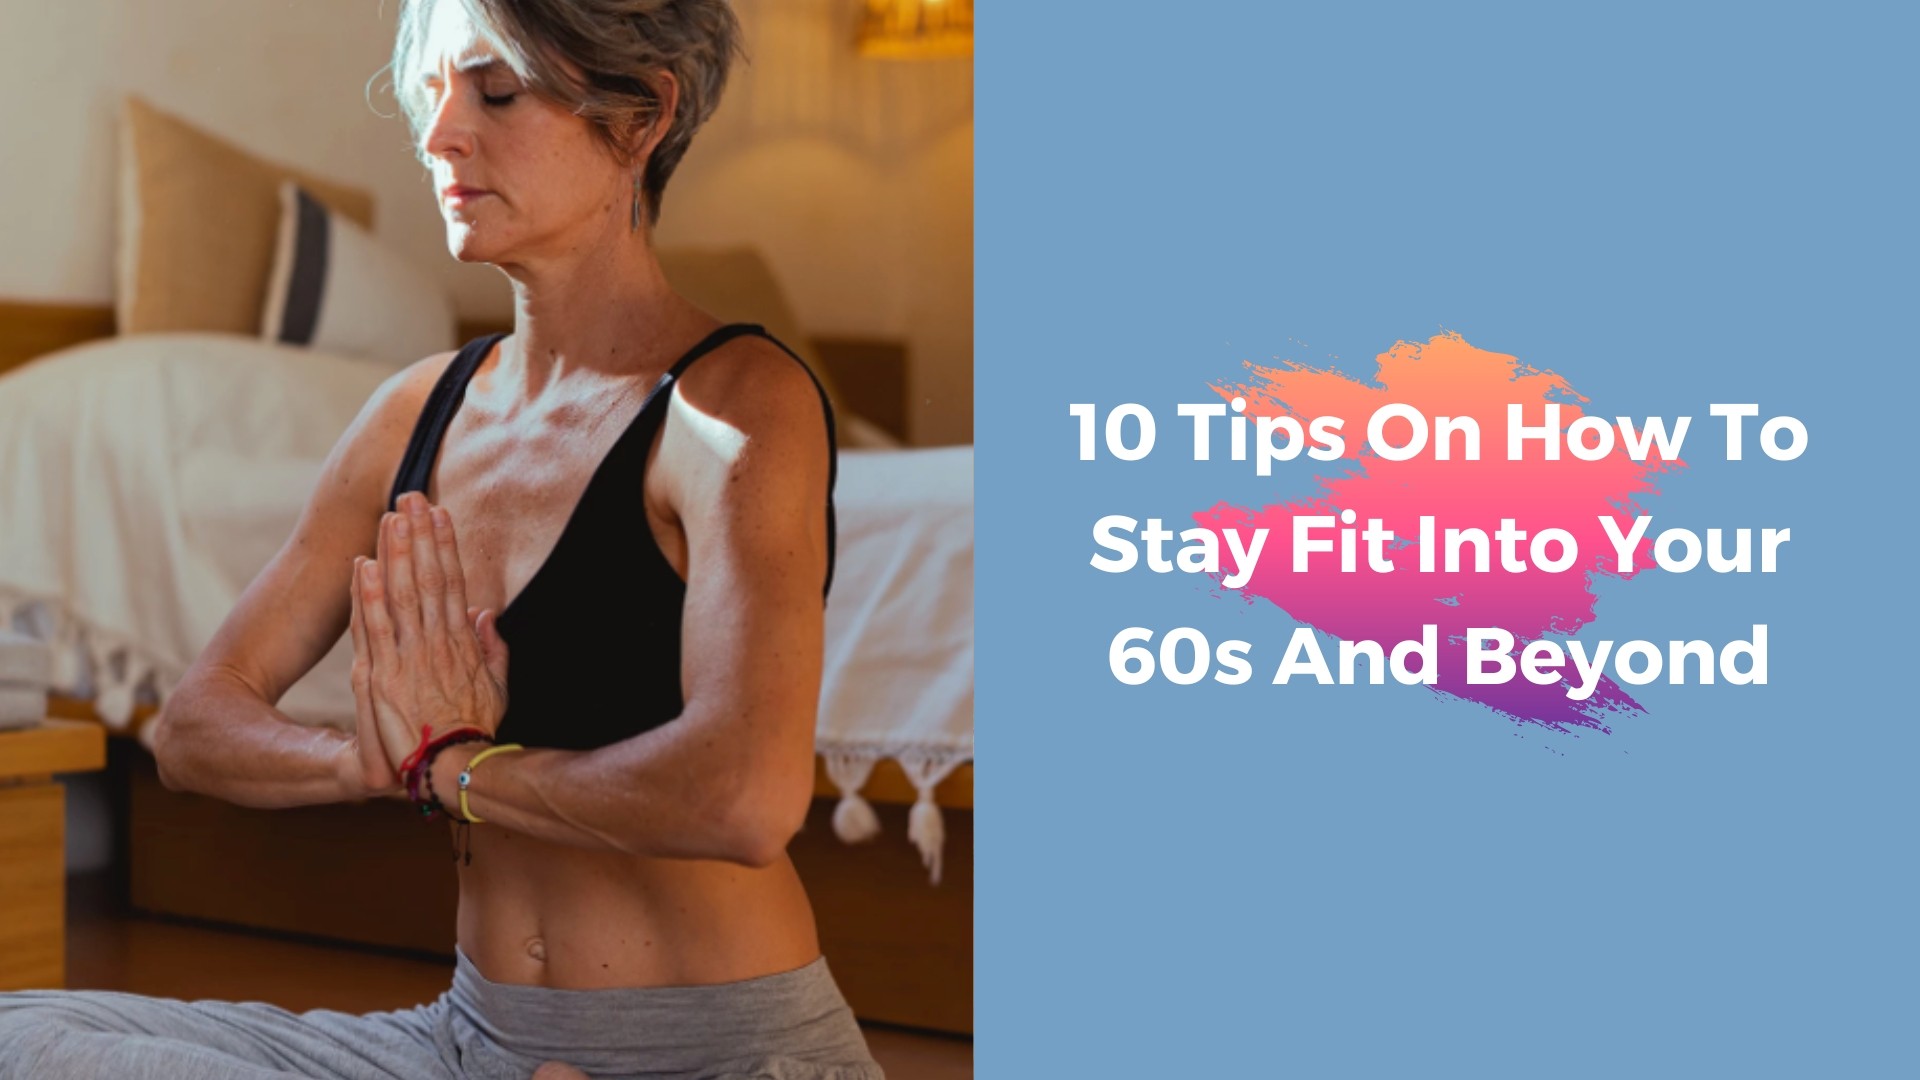 Staying fit in your 60s